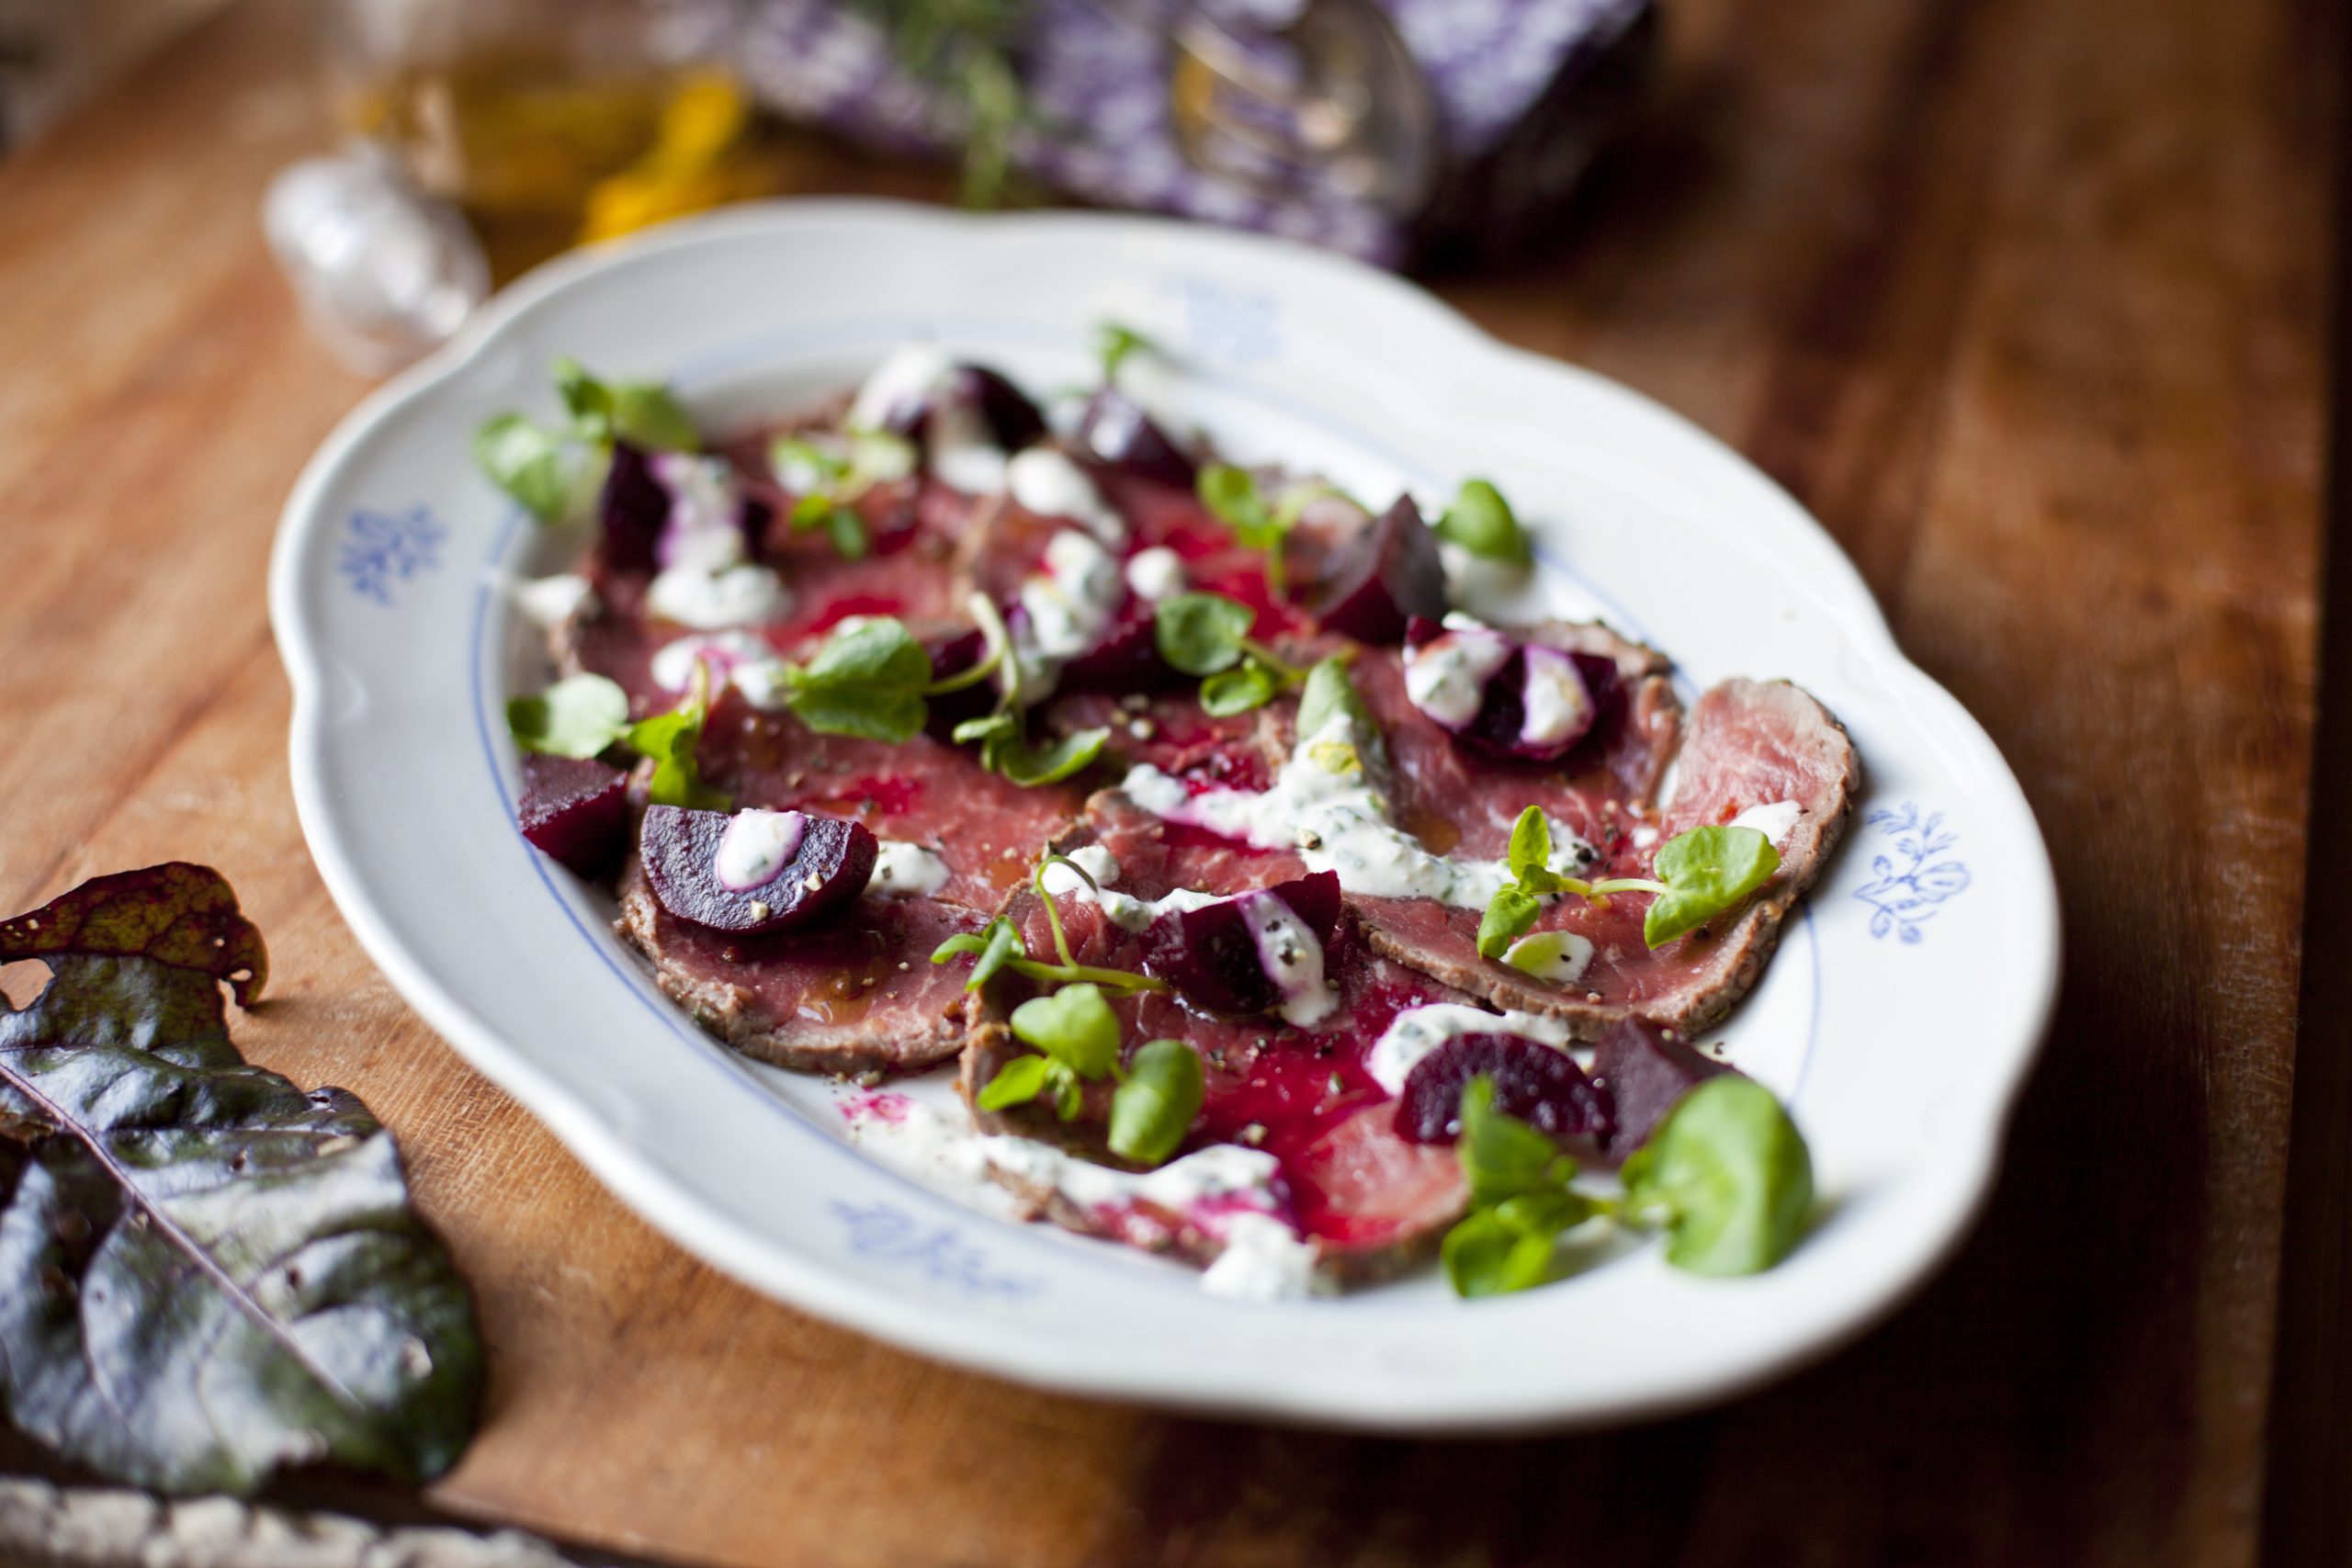 Beef Carpaccio with Roasted Beets and Parmesan Shavings